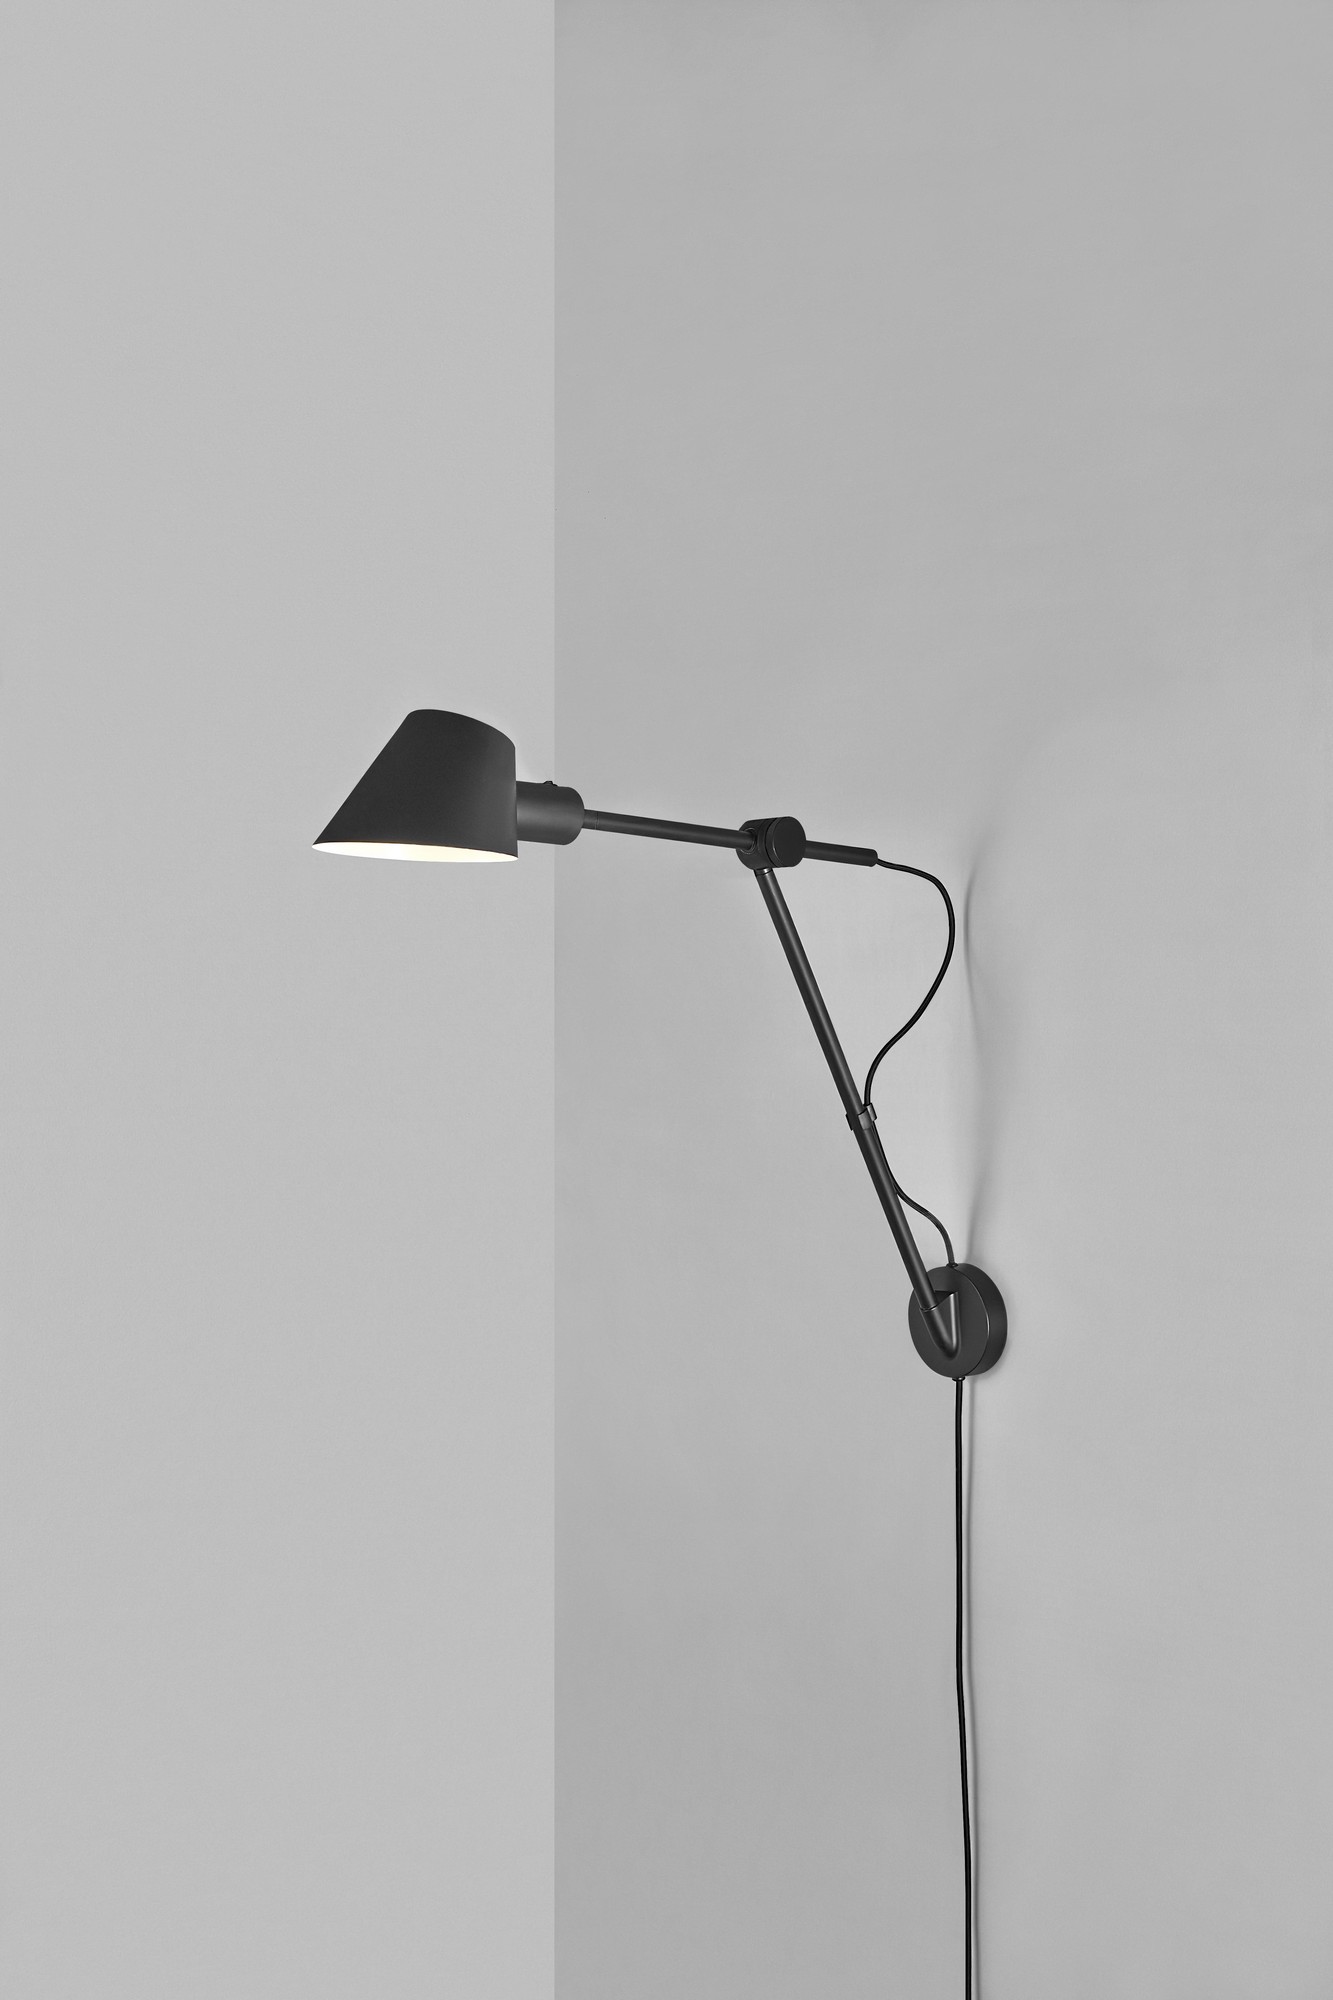 Lampadaire Noir STAY - Design For The People by Nordlux 2020464003